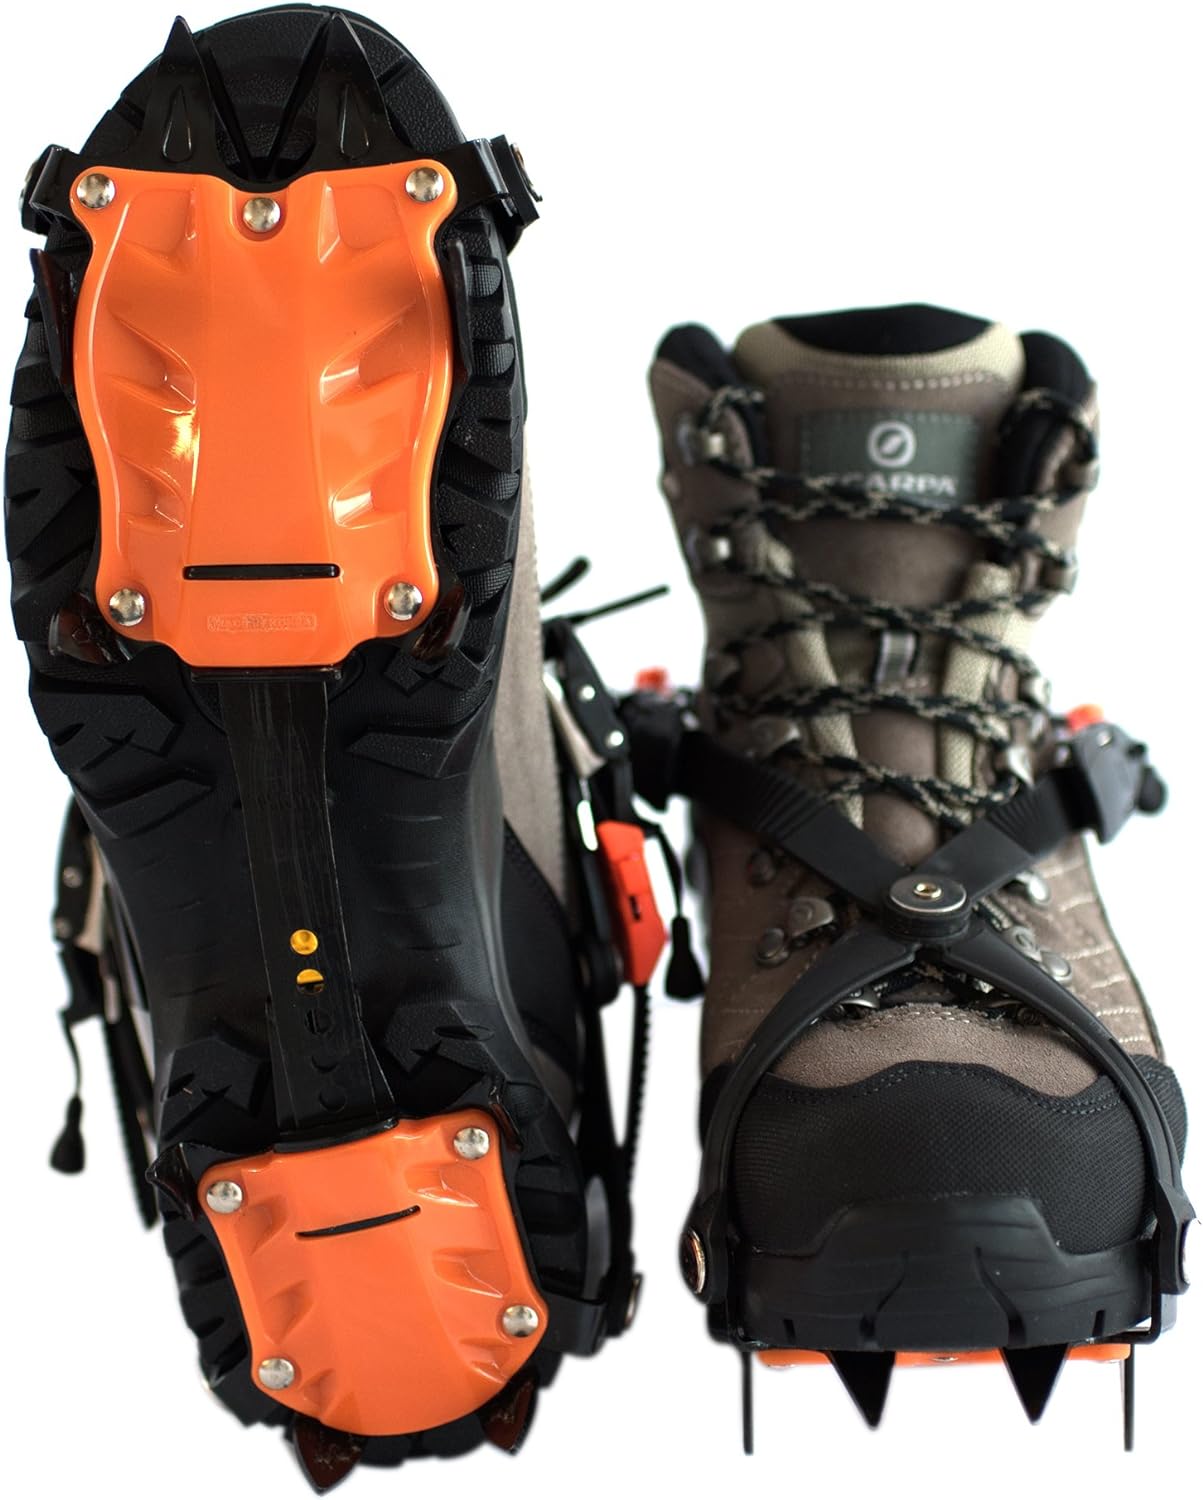 Hillsound Trail Crampon Pro I Ice Cleat Traction System for Off Trail & Backcountry Hiking